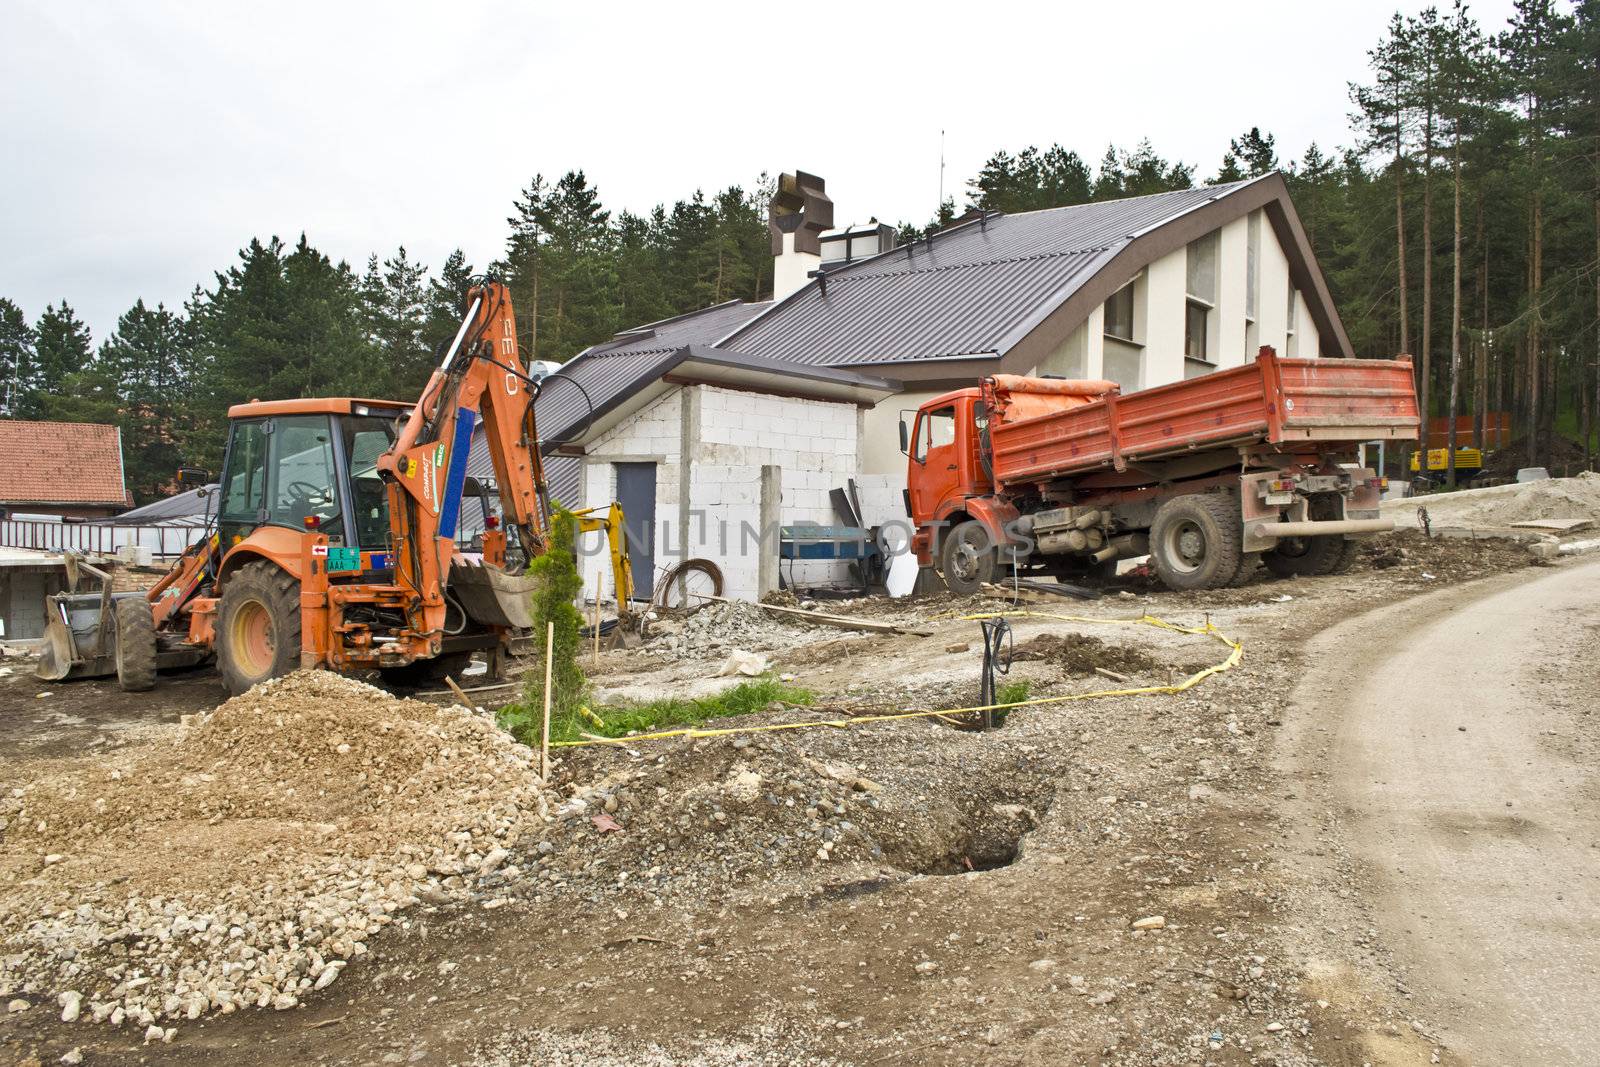 Excavator on site working,road repair,building house by vician